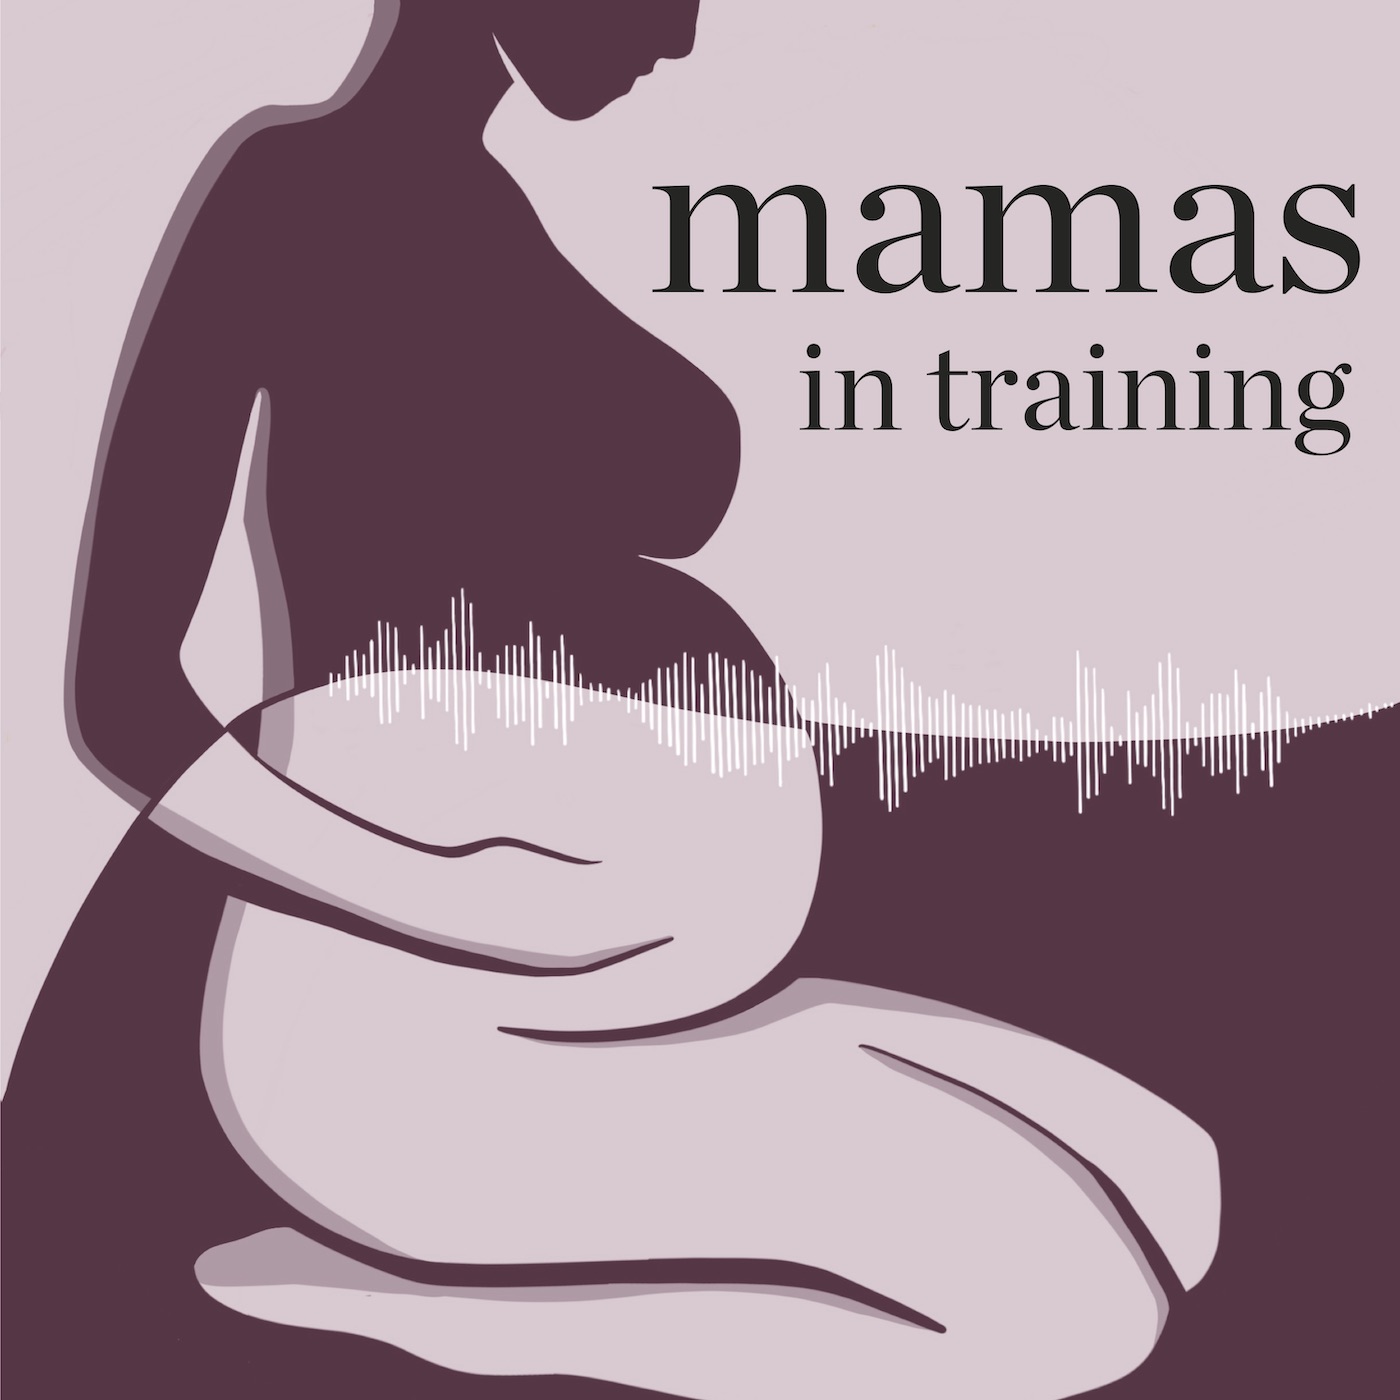 Introducing: ”Mamas in Training”